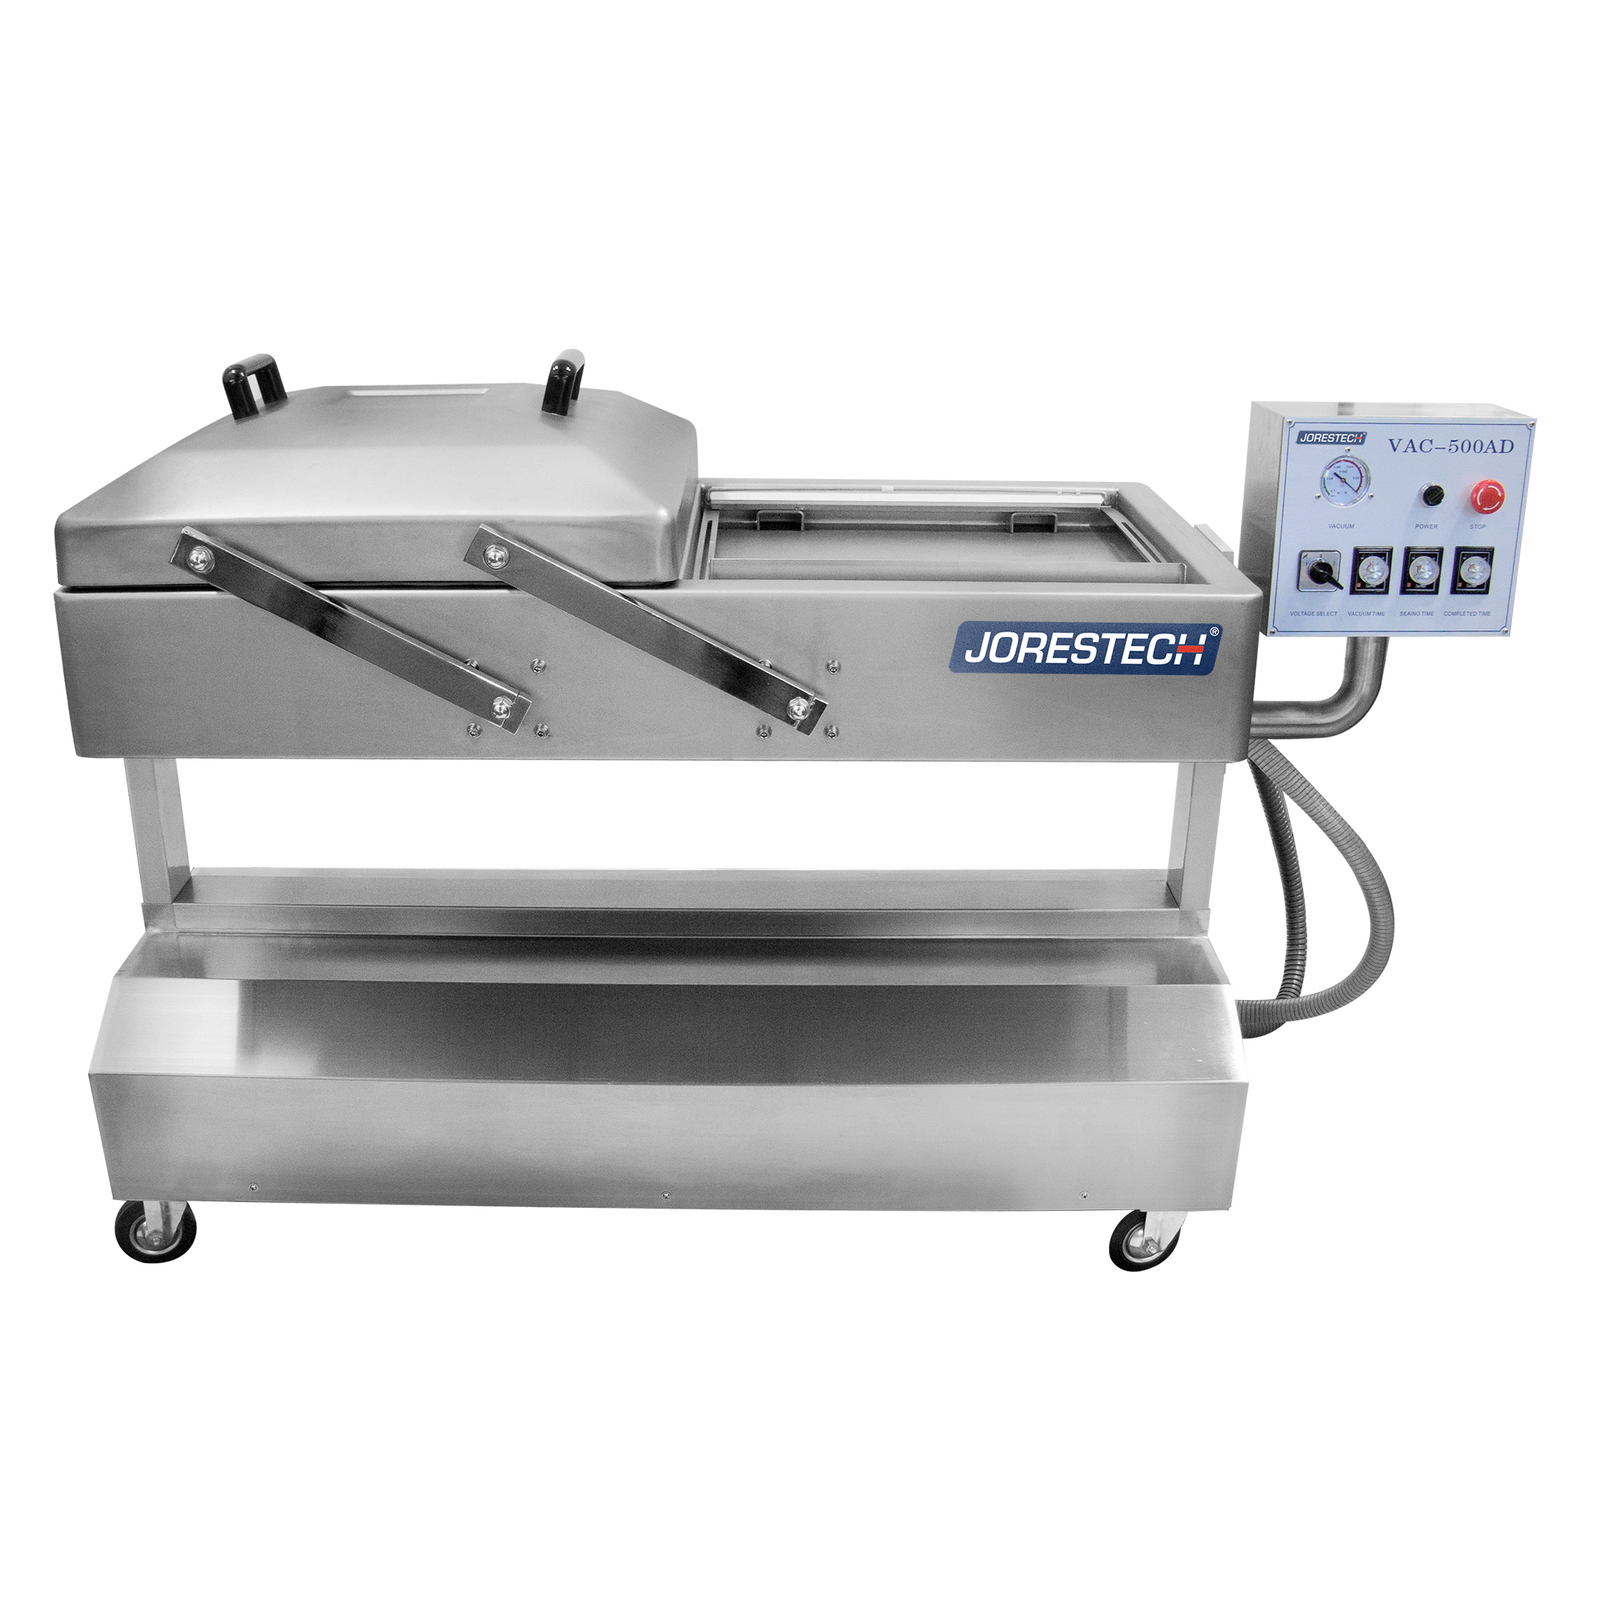 Tabletop Commercial Single Chamber Vacuum Sealer with Dual 20.5” Seal Bar